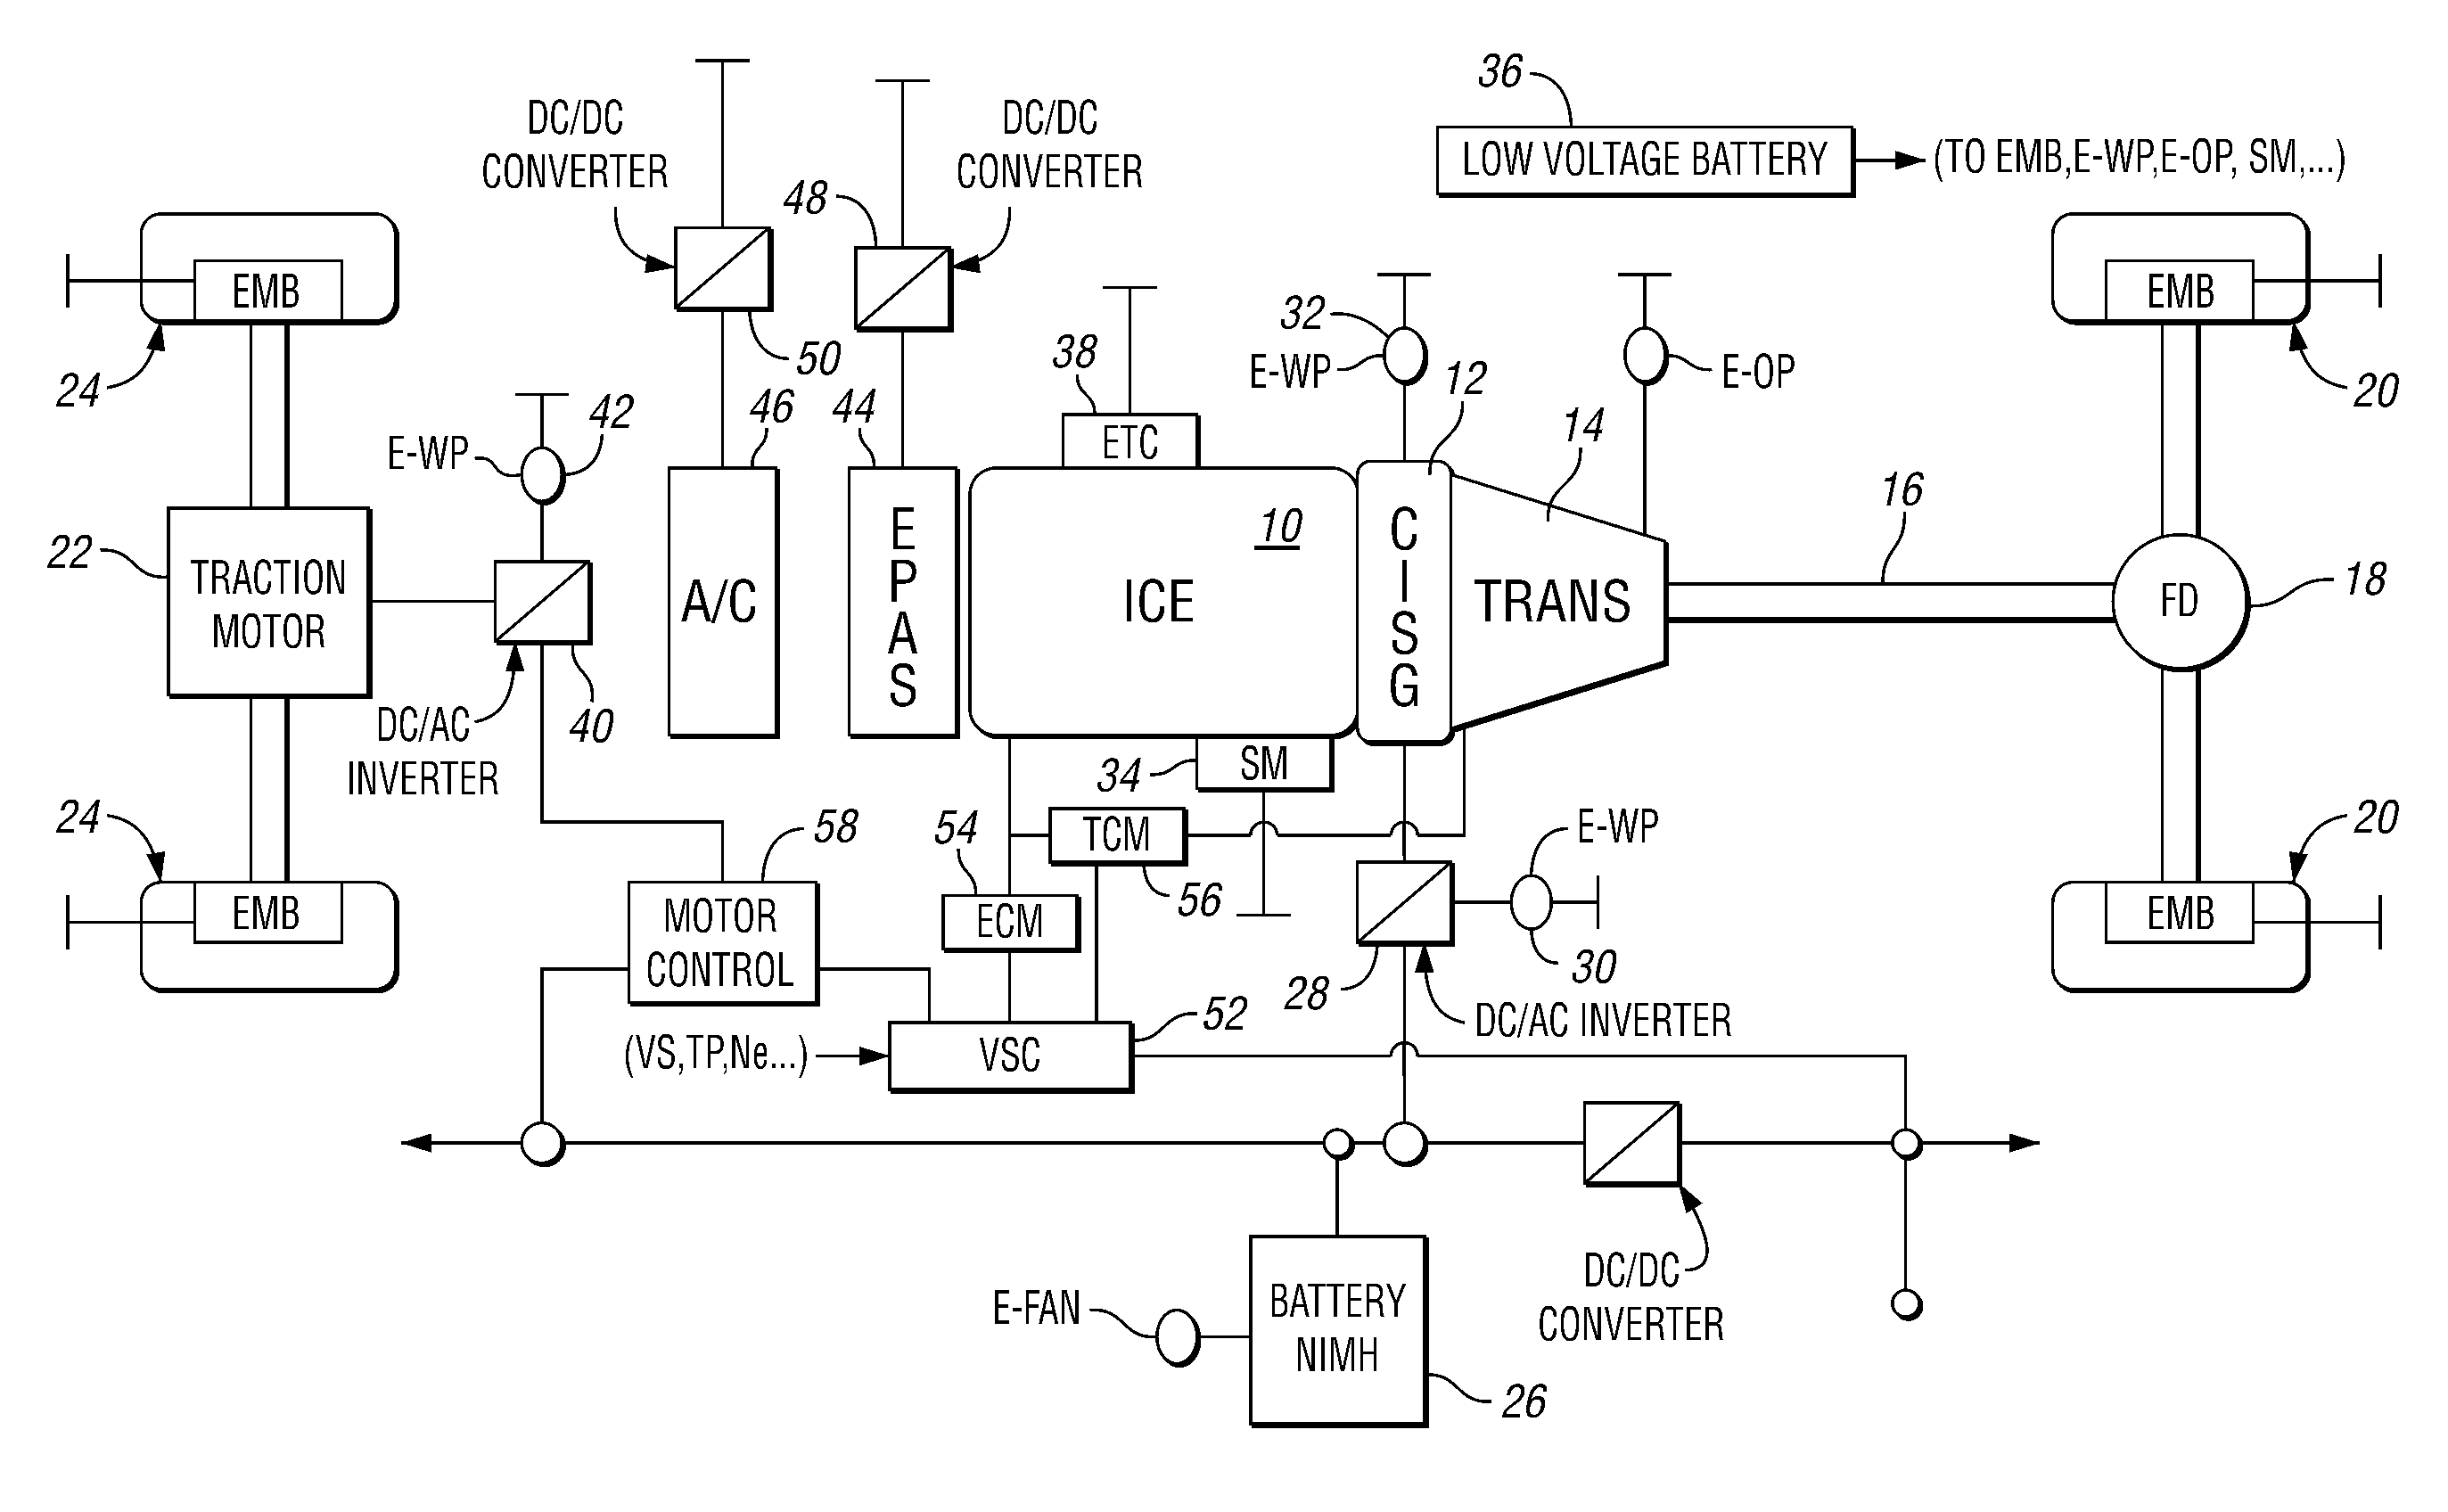 Power-on downshift control for a hybrid electric vehicle powertrain